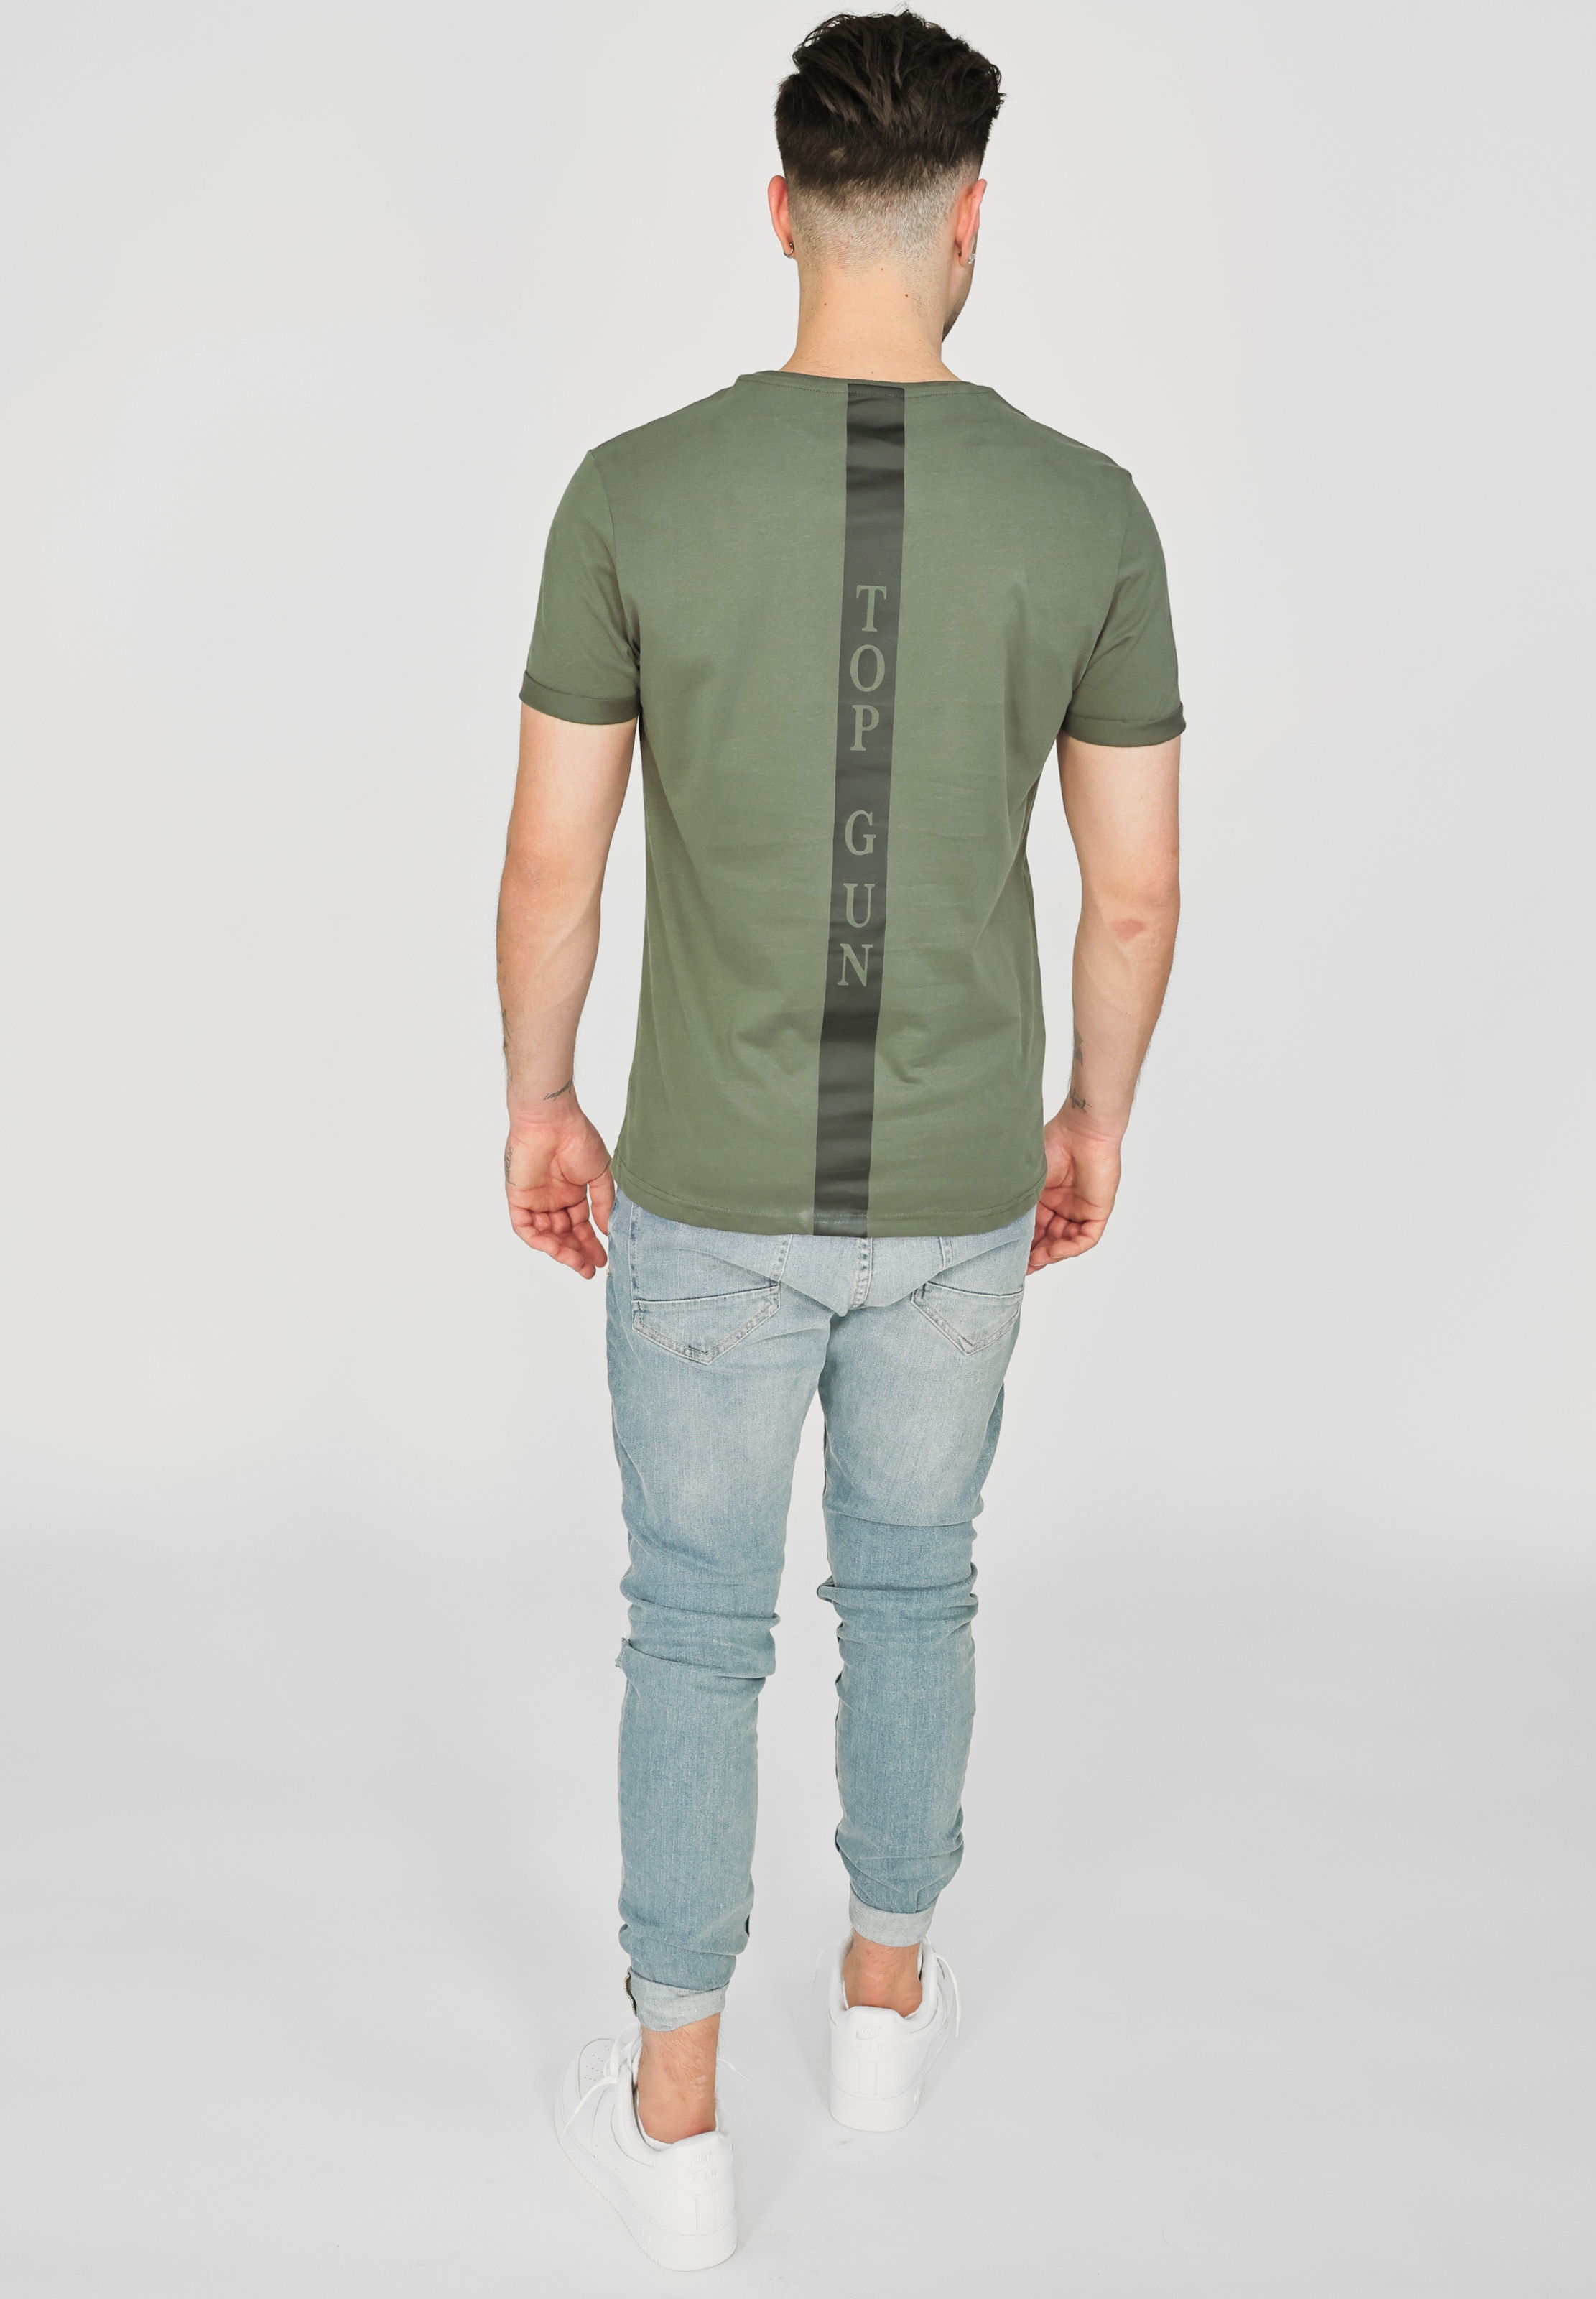 TOP GUN Shirt 'TG20213011' in Olive | ABOUT YOU